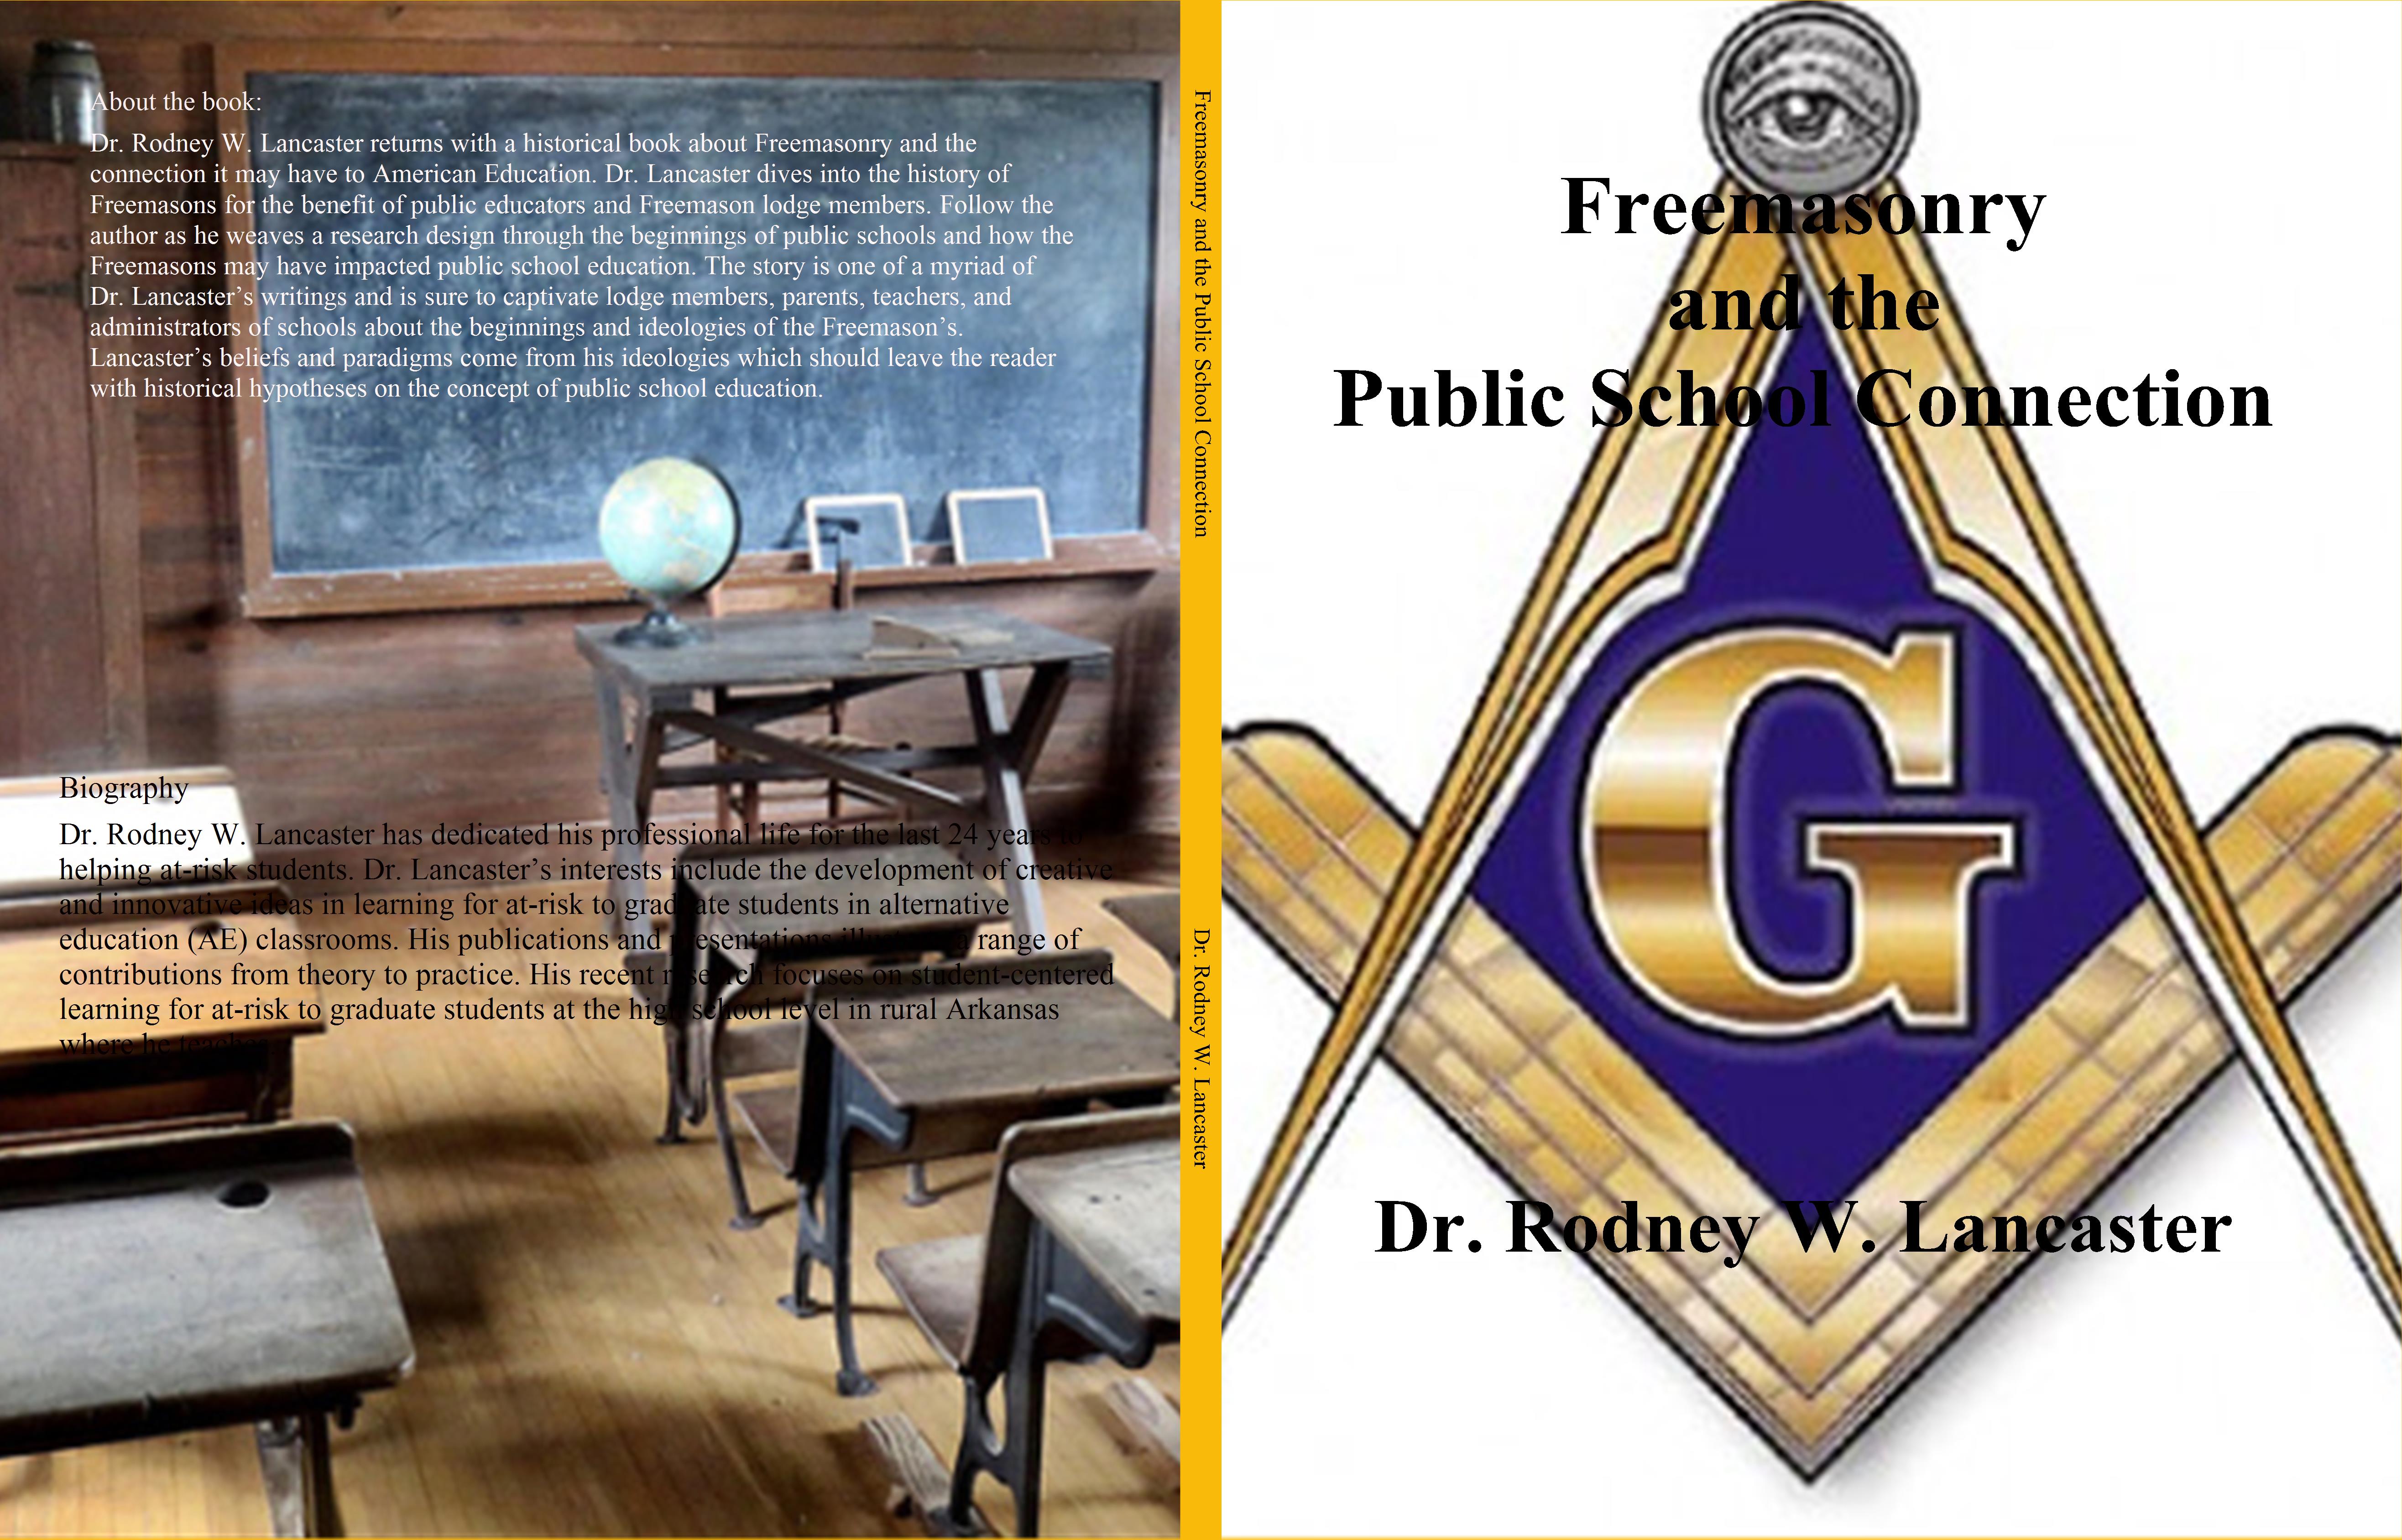 Freemasonry and the Public School Connection cover image